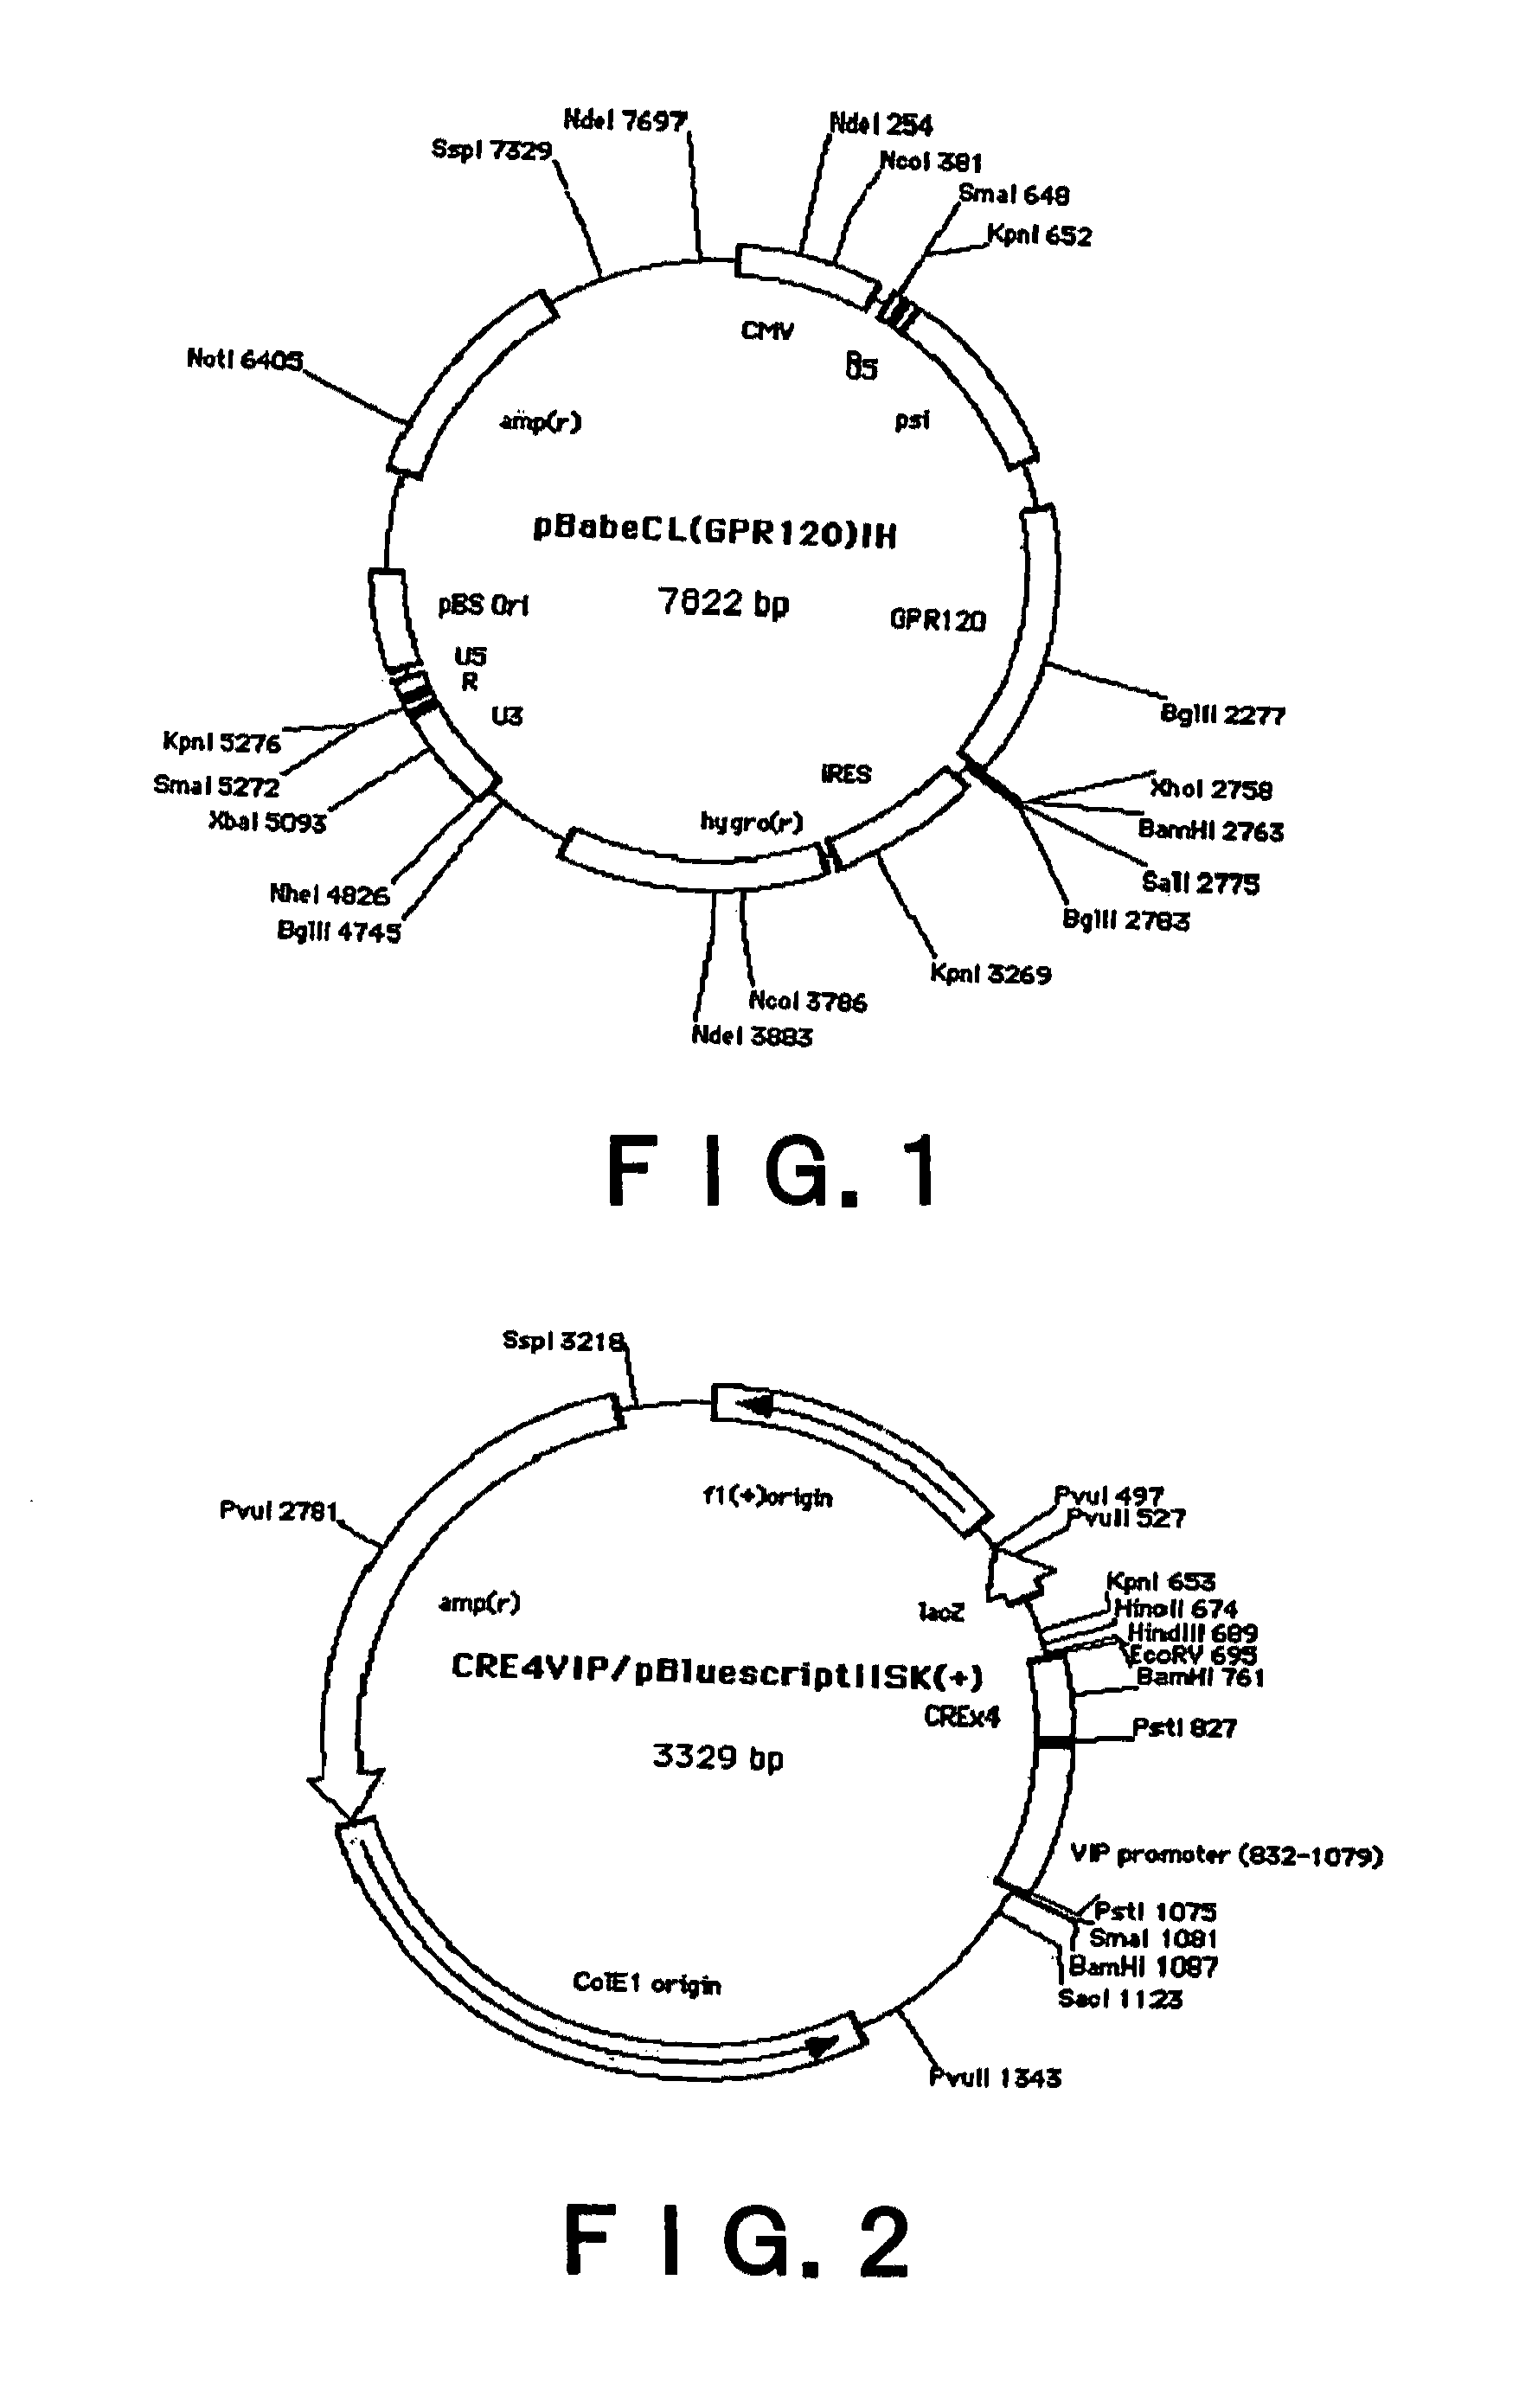 Method for screening of substance which alter GPR120-mediated cell-stimulating activities